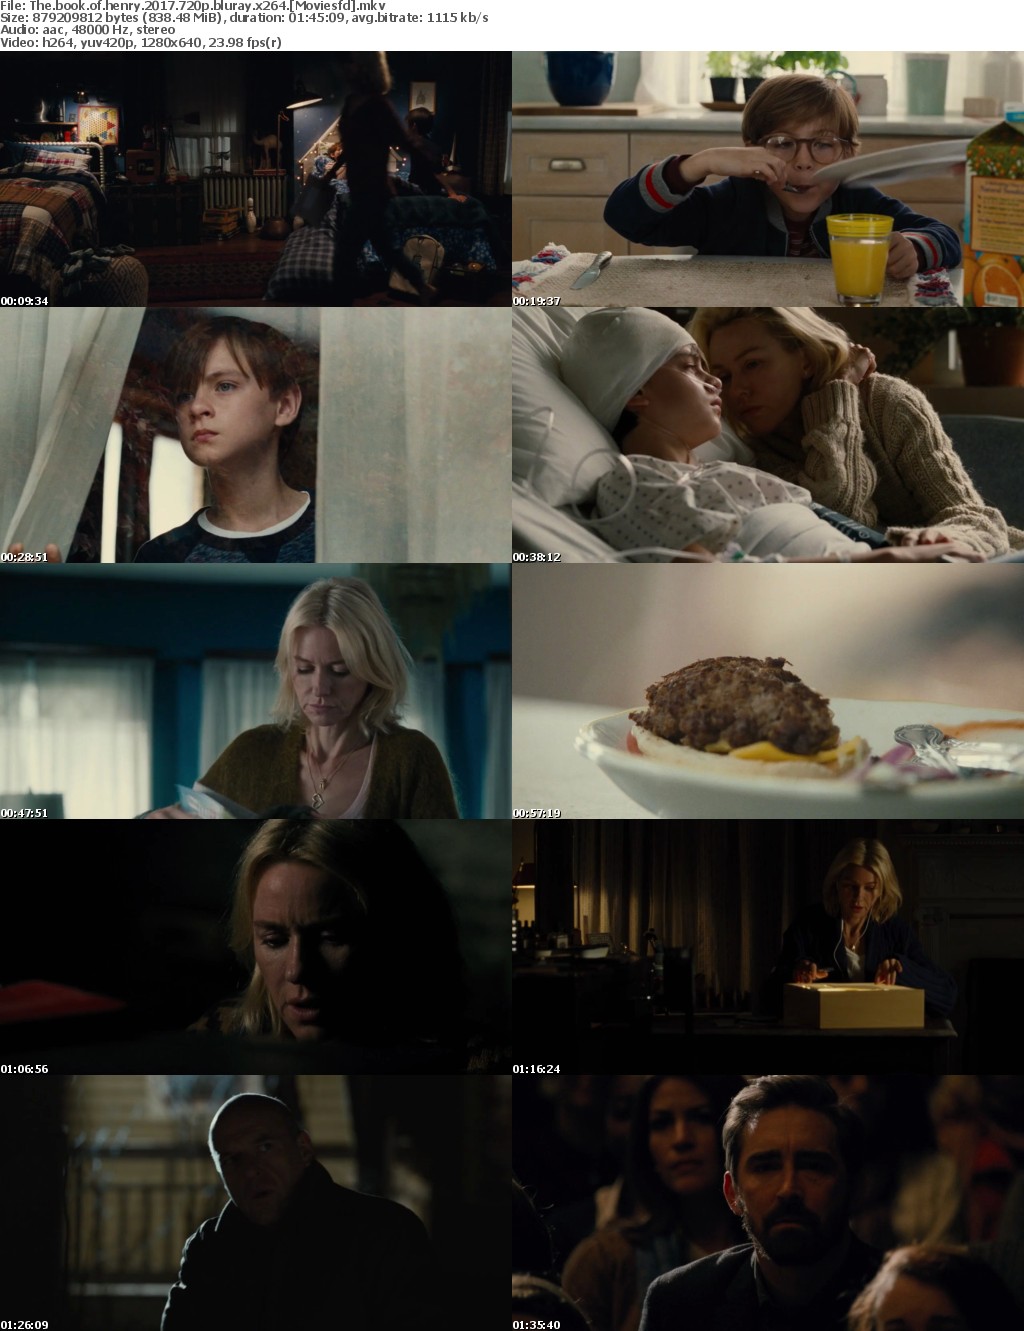 The Book Of Henry (2017) 720p BluRay x264 - MoviesFD